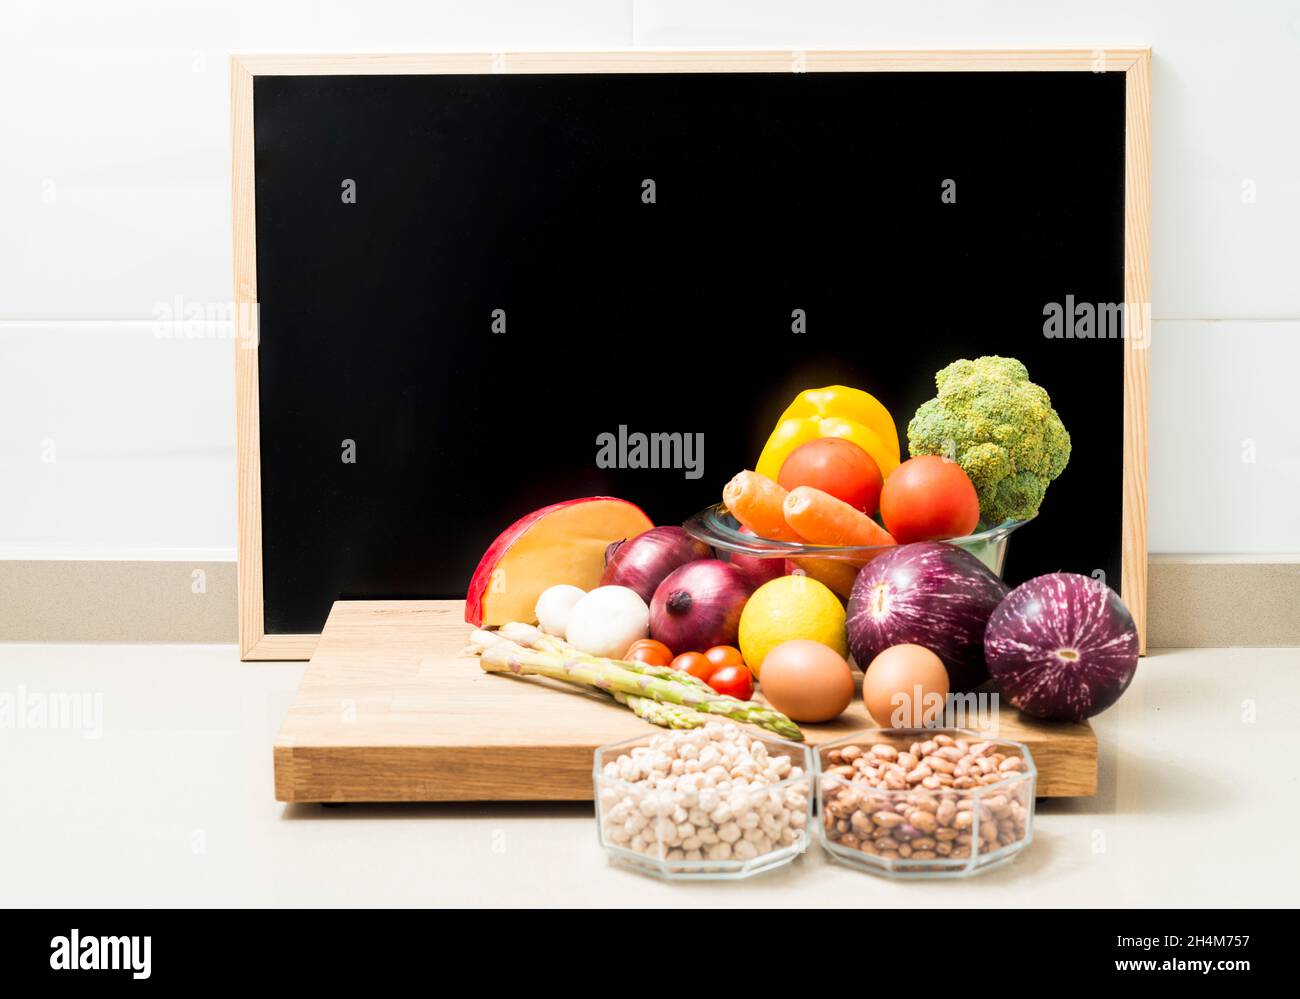 Still life with healthy food and a blackboard with space for copying. Conceptual image about healthy food diets. Copy space. Stock Photo